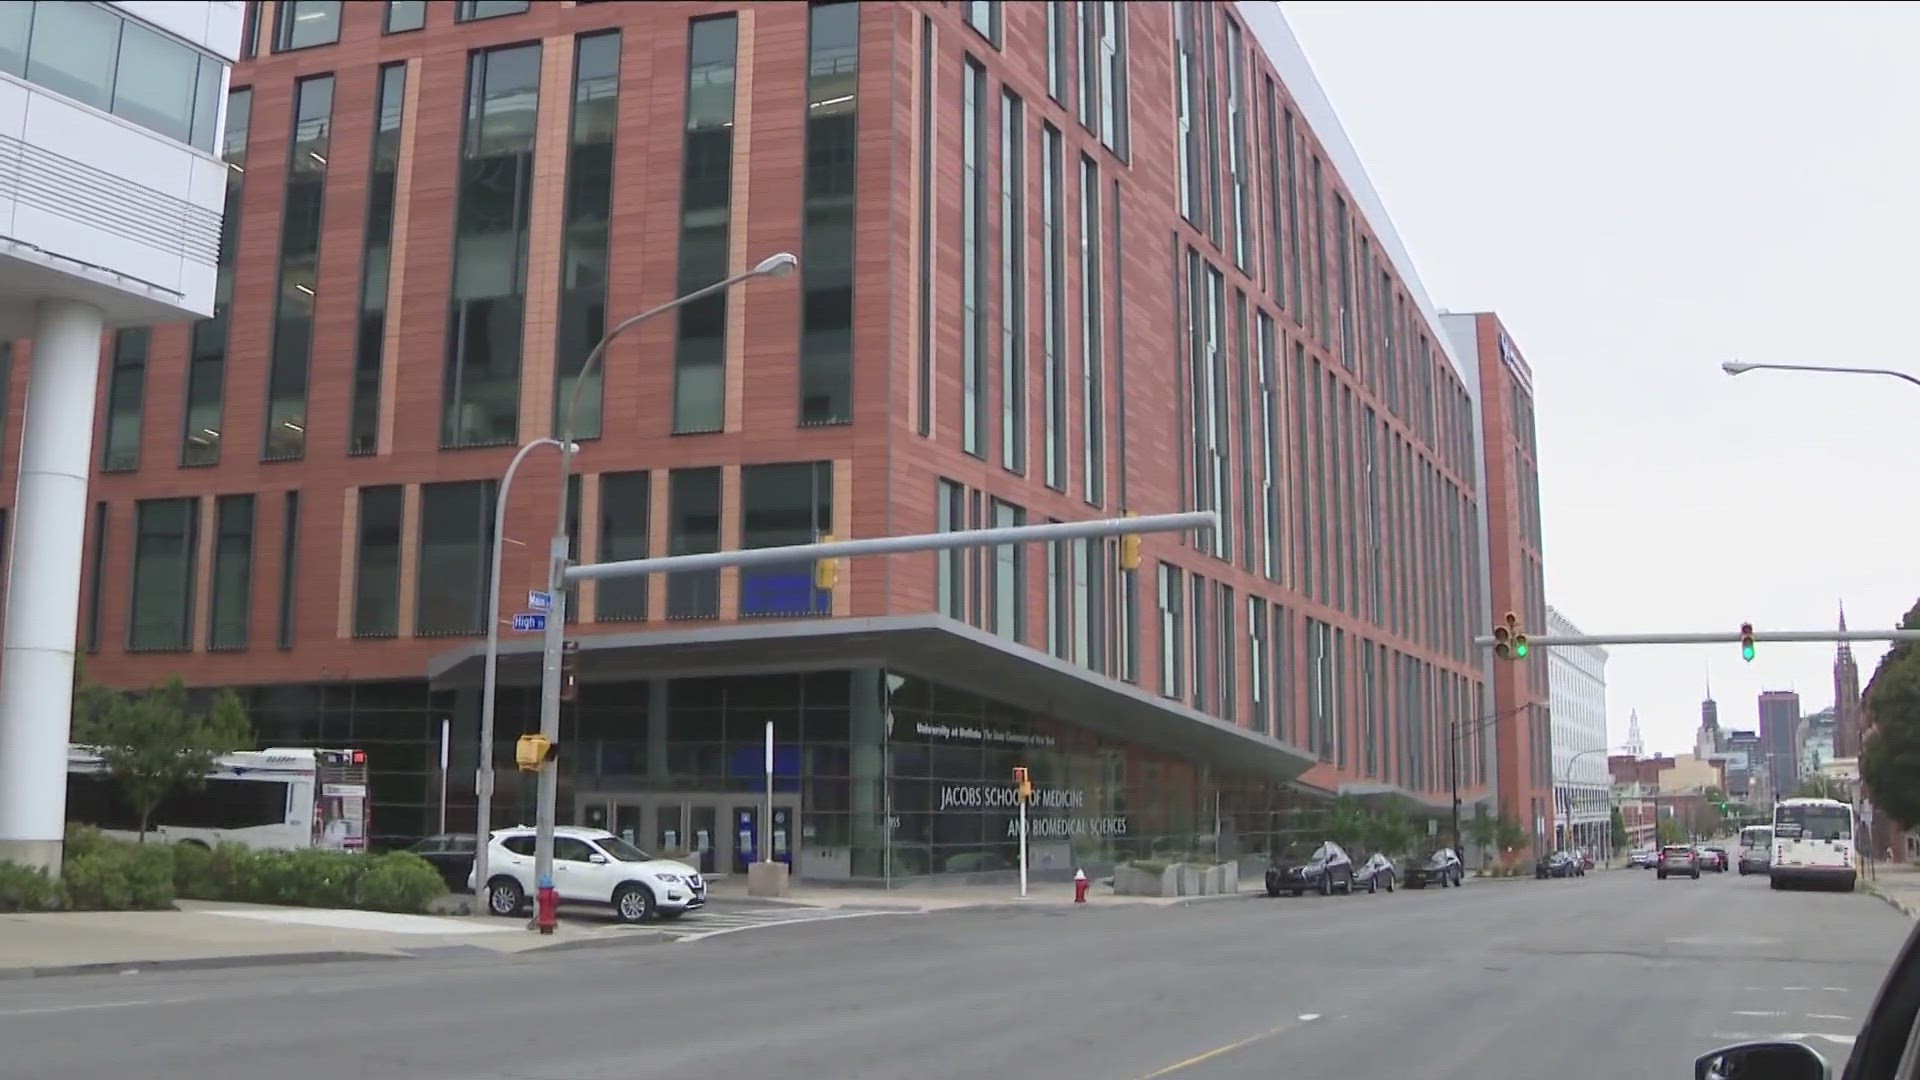 In an effort to show a united front following the May 14 shooting, the UB Jacobs School of Medicine is hosting a community engagement fair on Thursday afternoon.